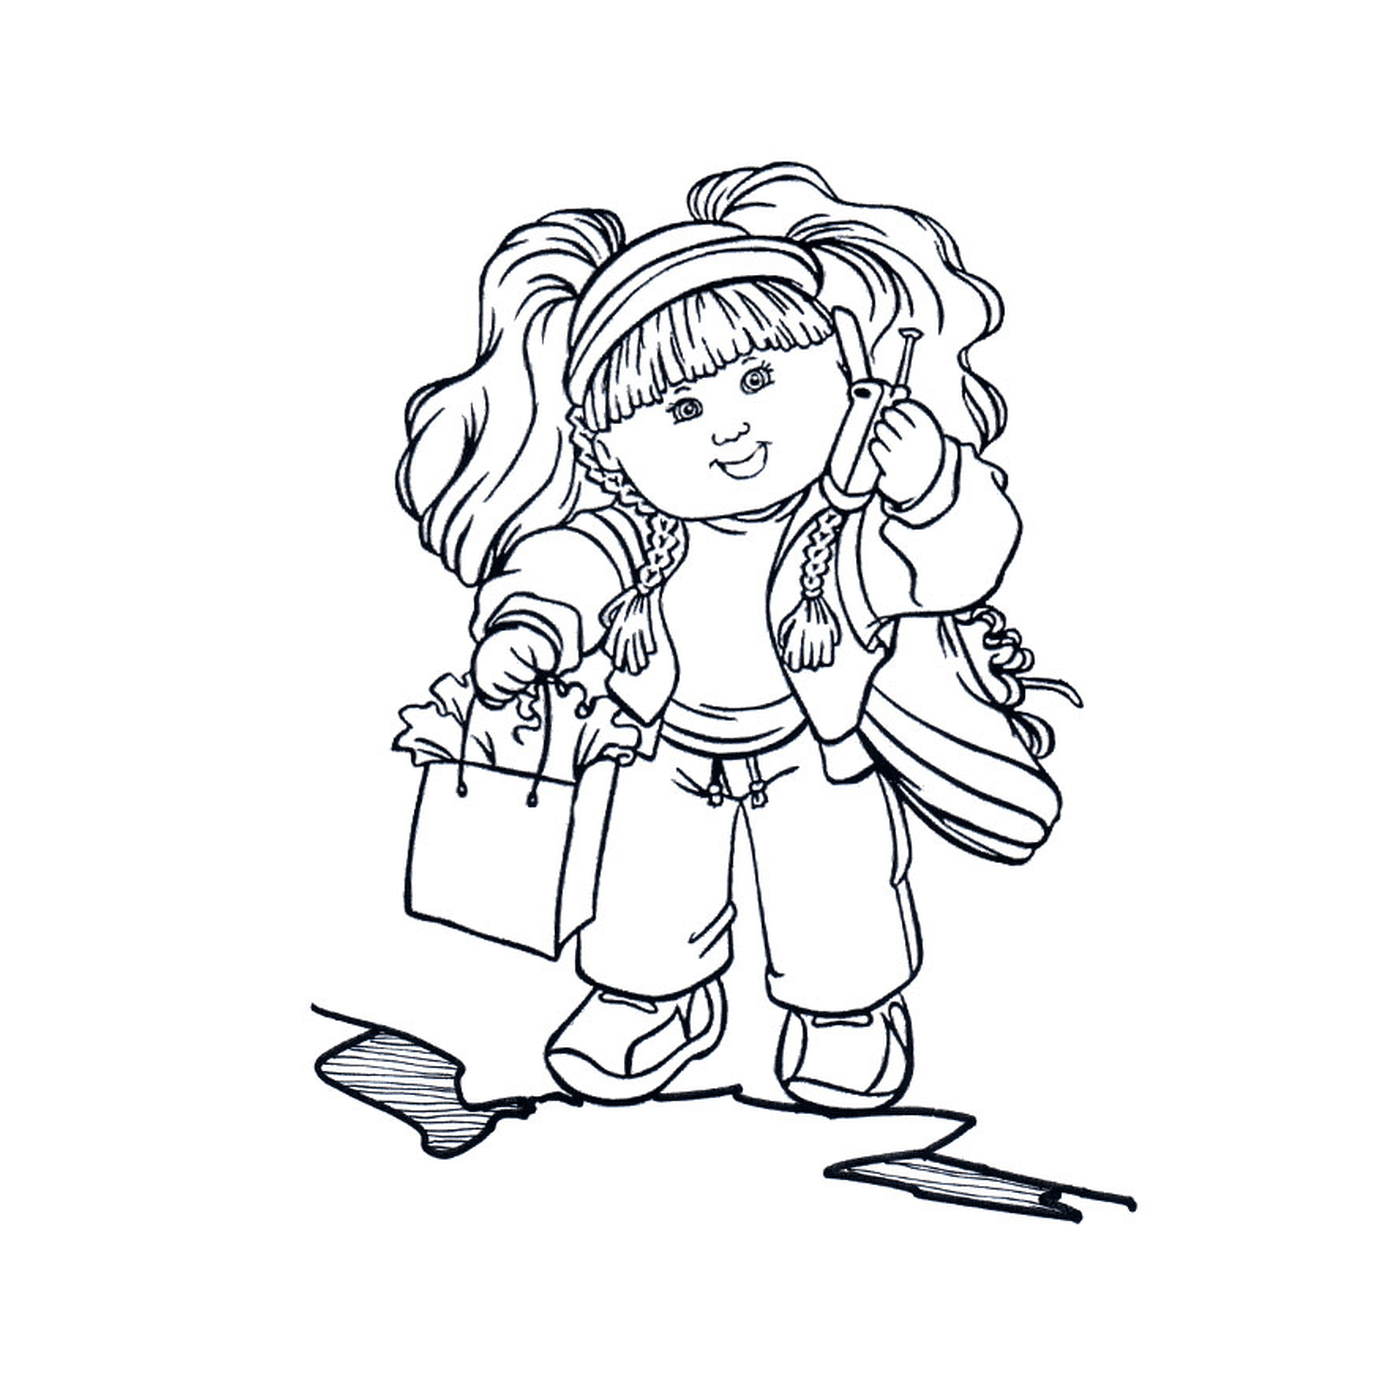  A 7-year-old girl holding shopping bags 